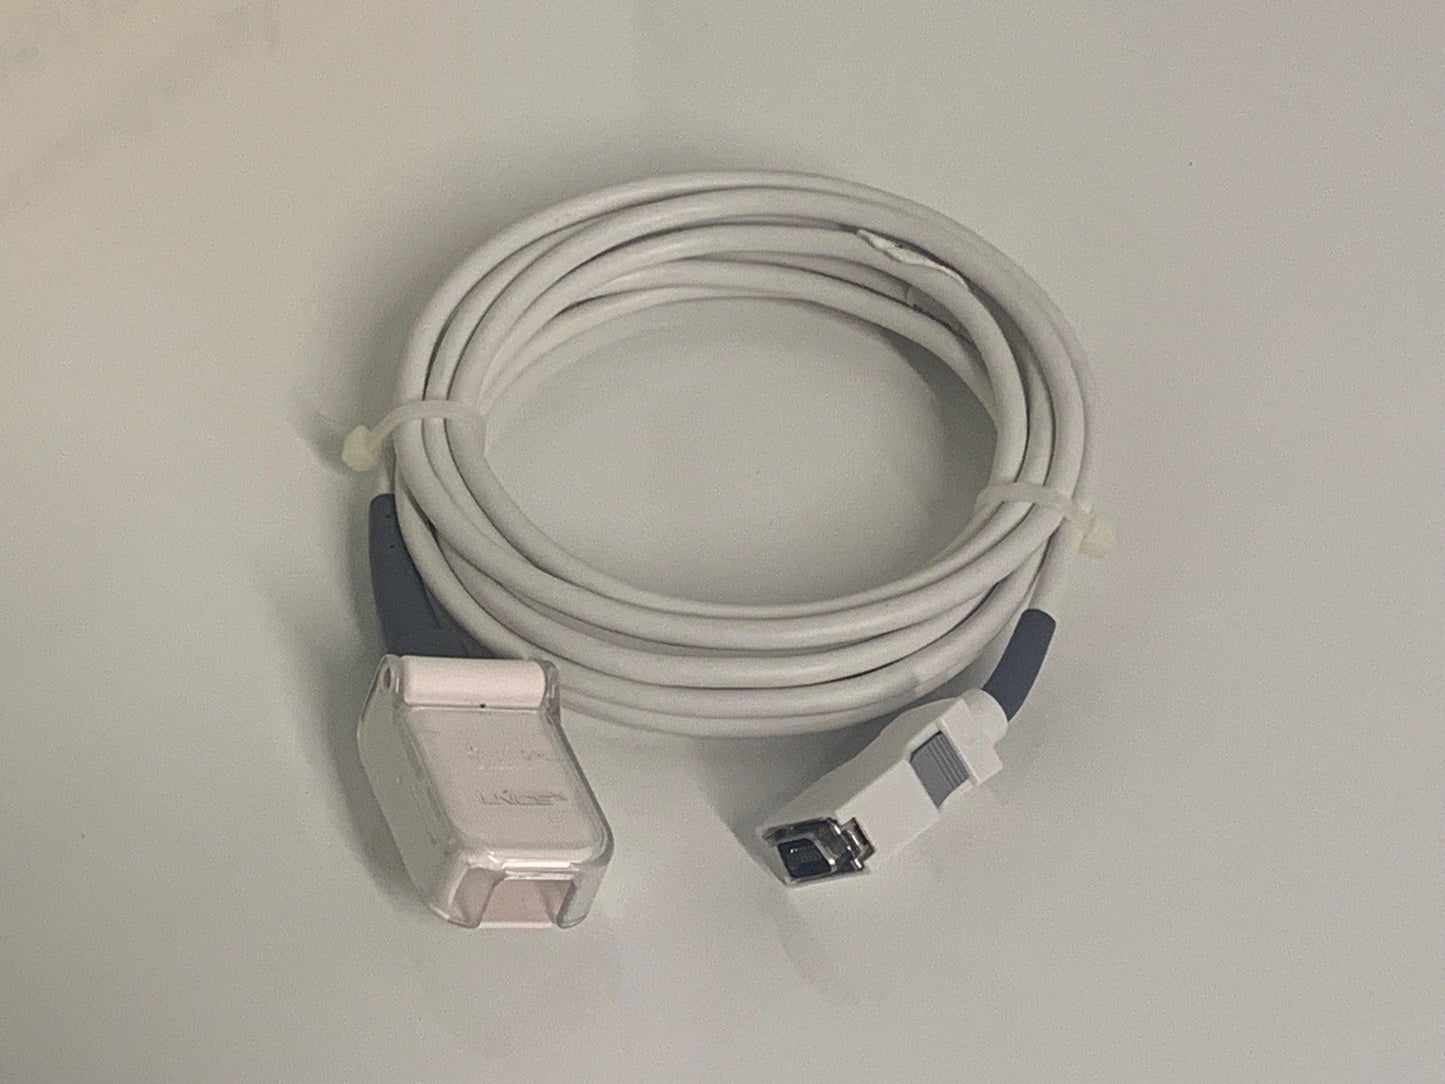 USED Masimo LNC-10 LNCS Direct Connect SpO2 Cable 1814 - MBR Medicals